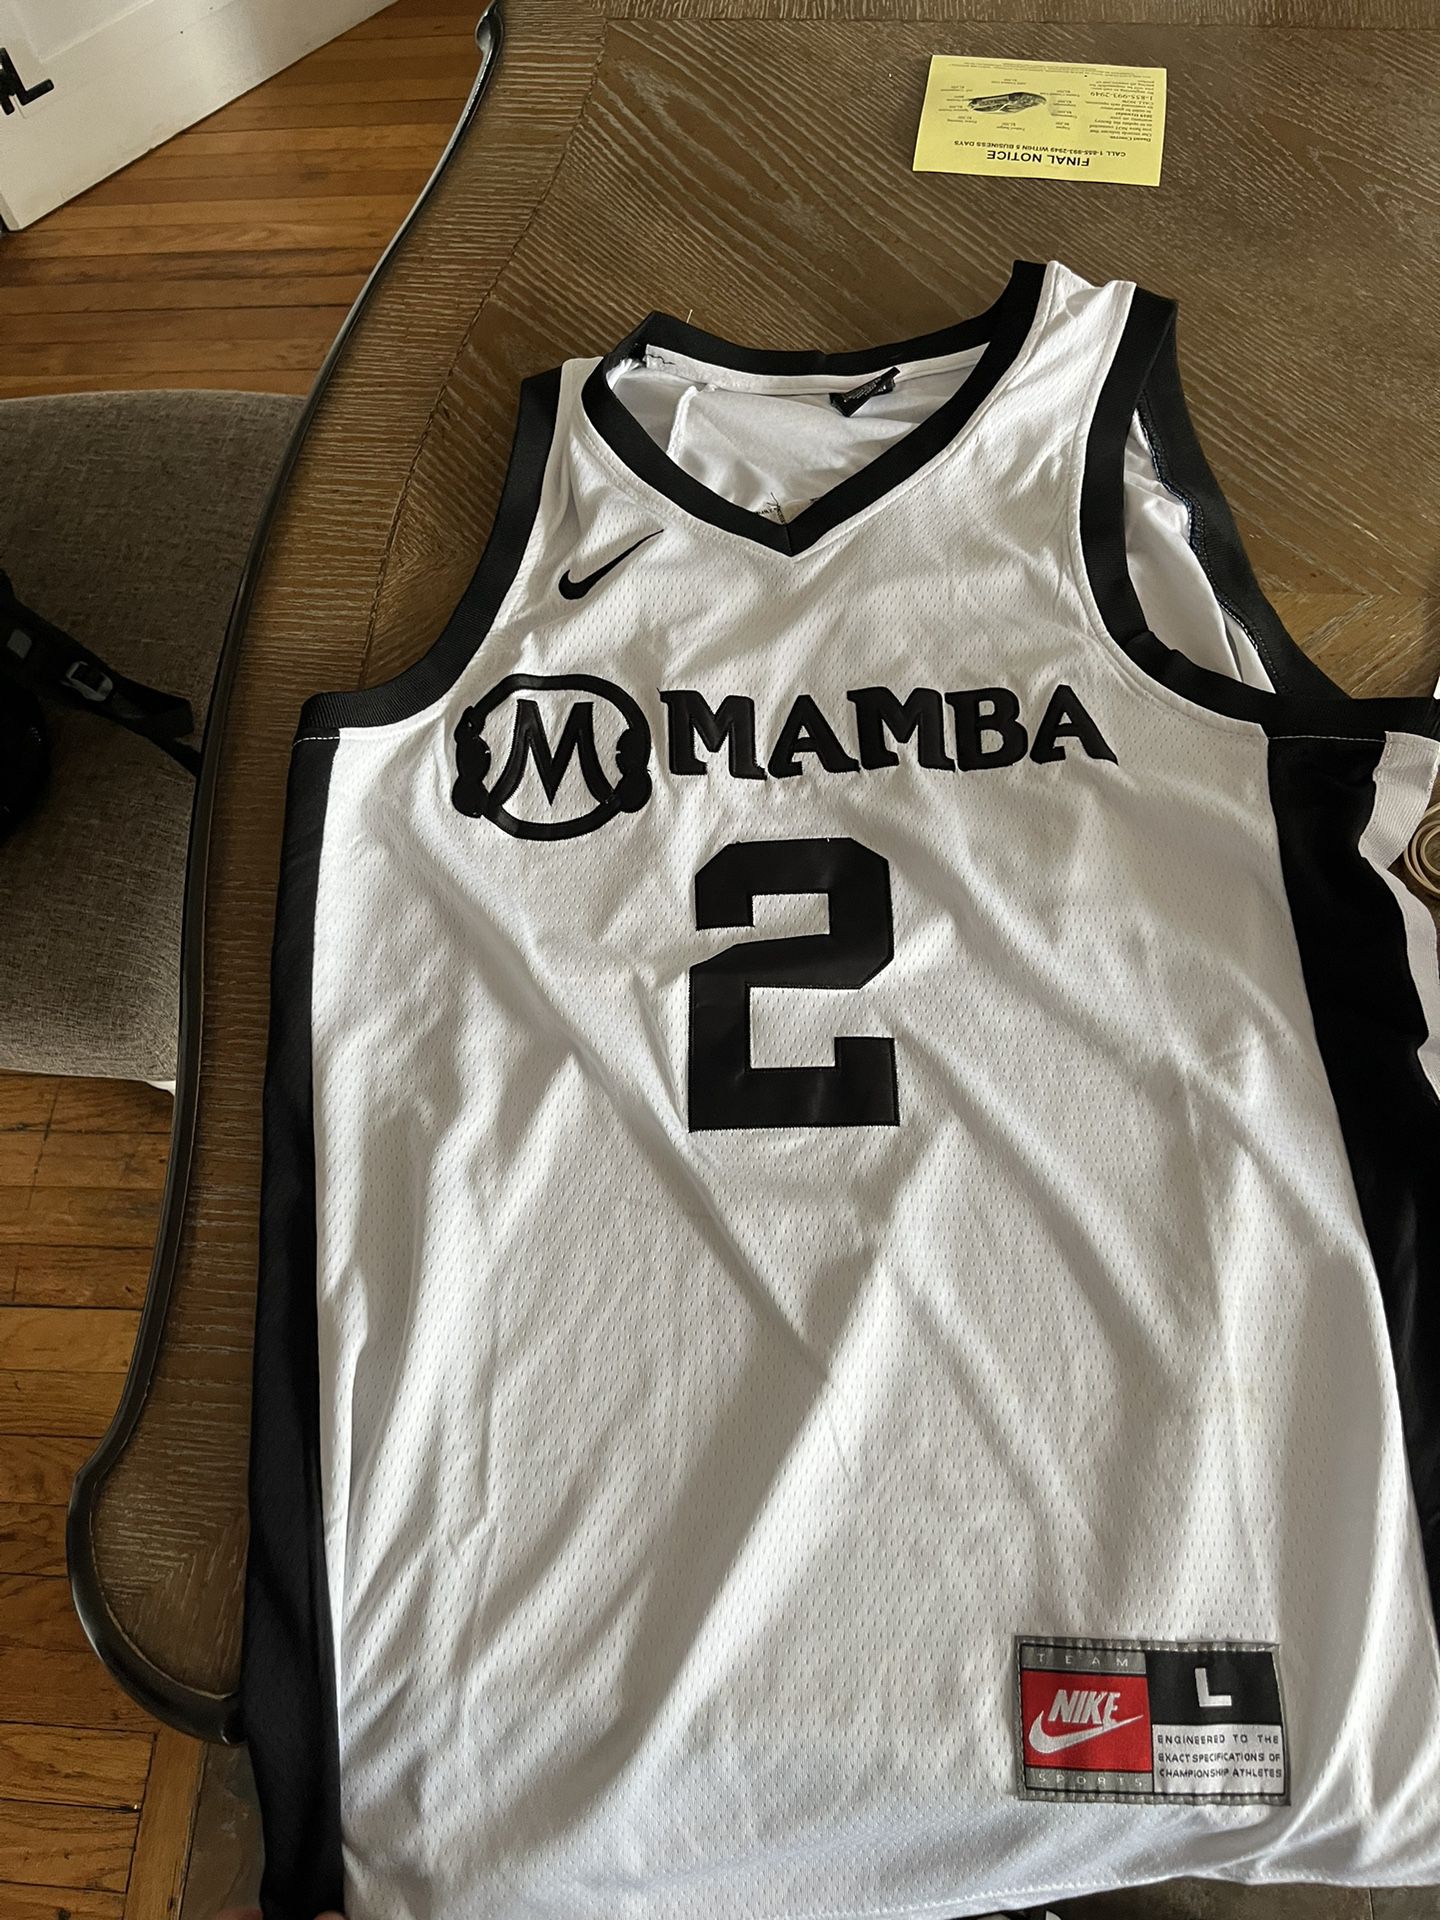 Mamba giana bryant jersey for Sale in Norwood, MA - OfferUp